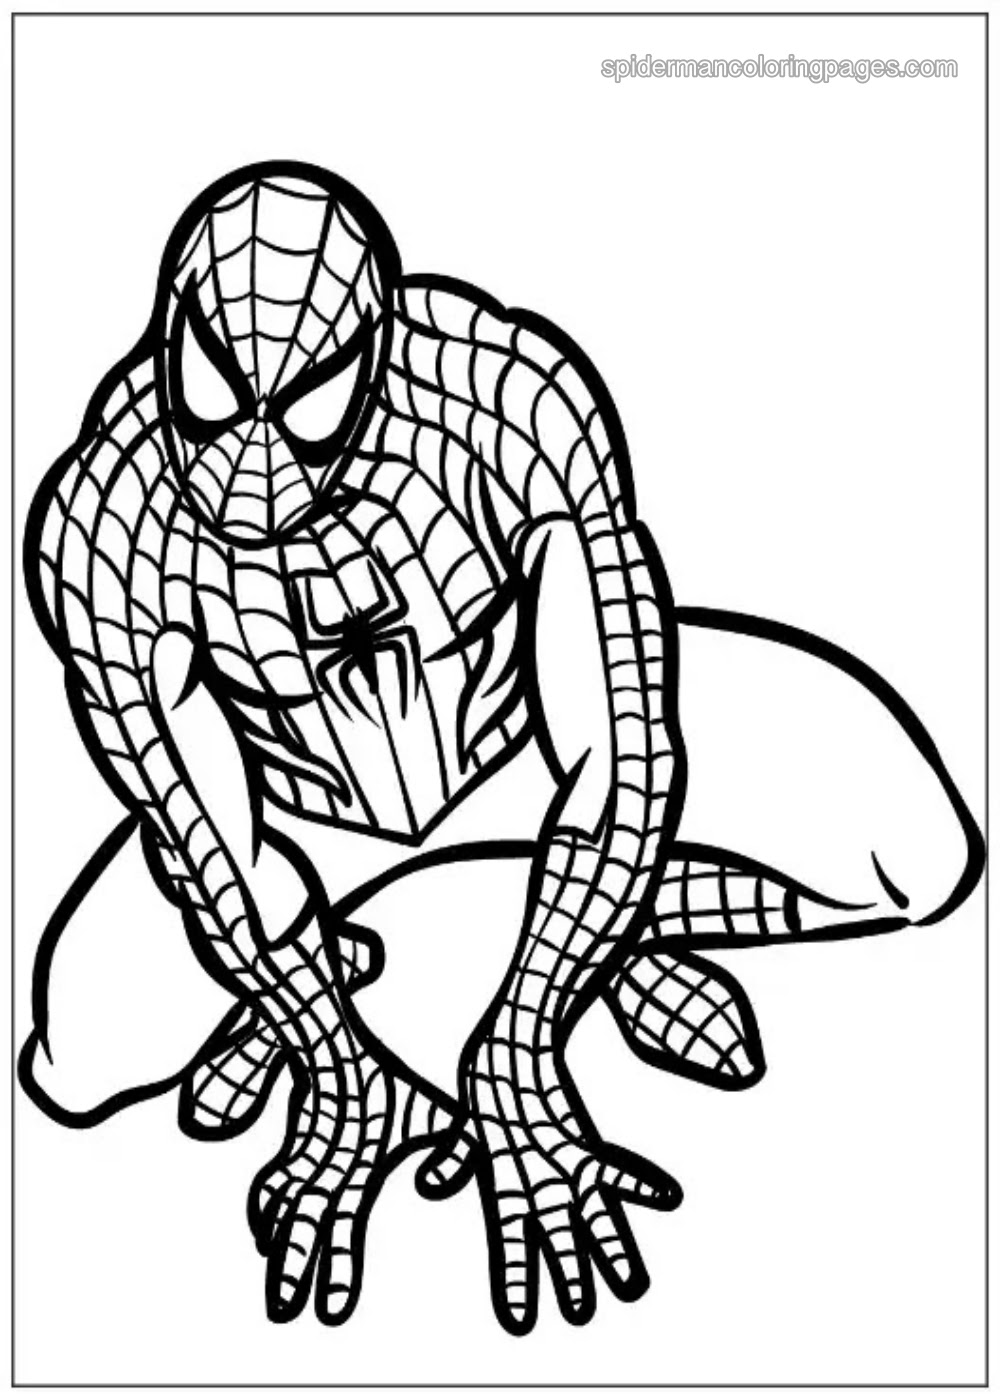 Á spiderman coloring pages â free printable sheets for kids